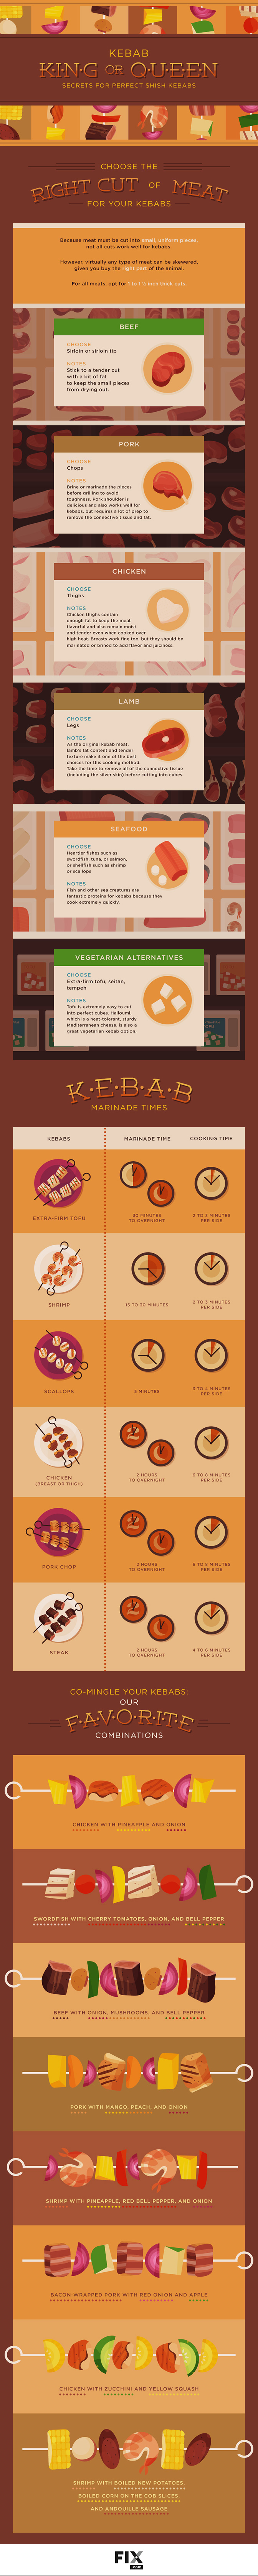 infograph showing different ways to make kabobs.